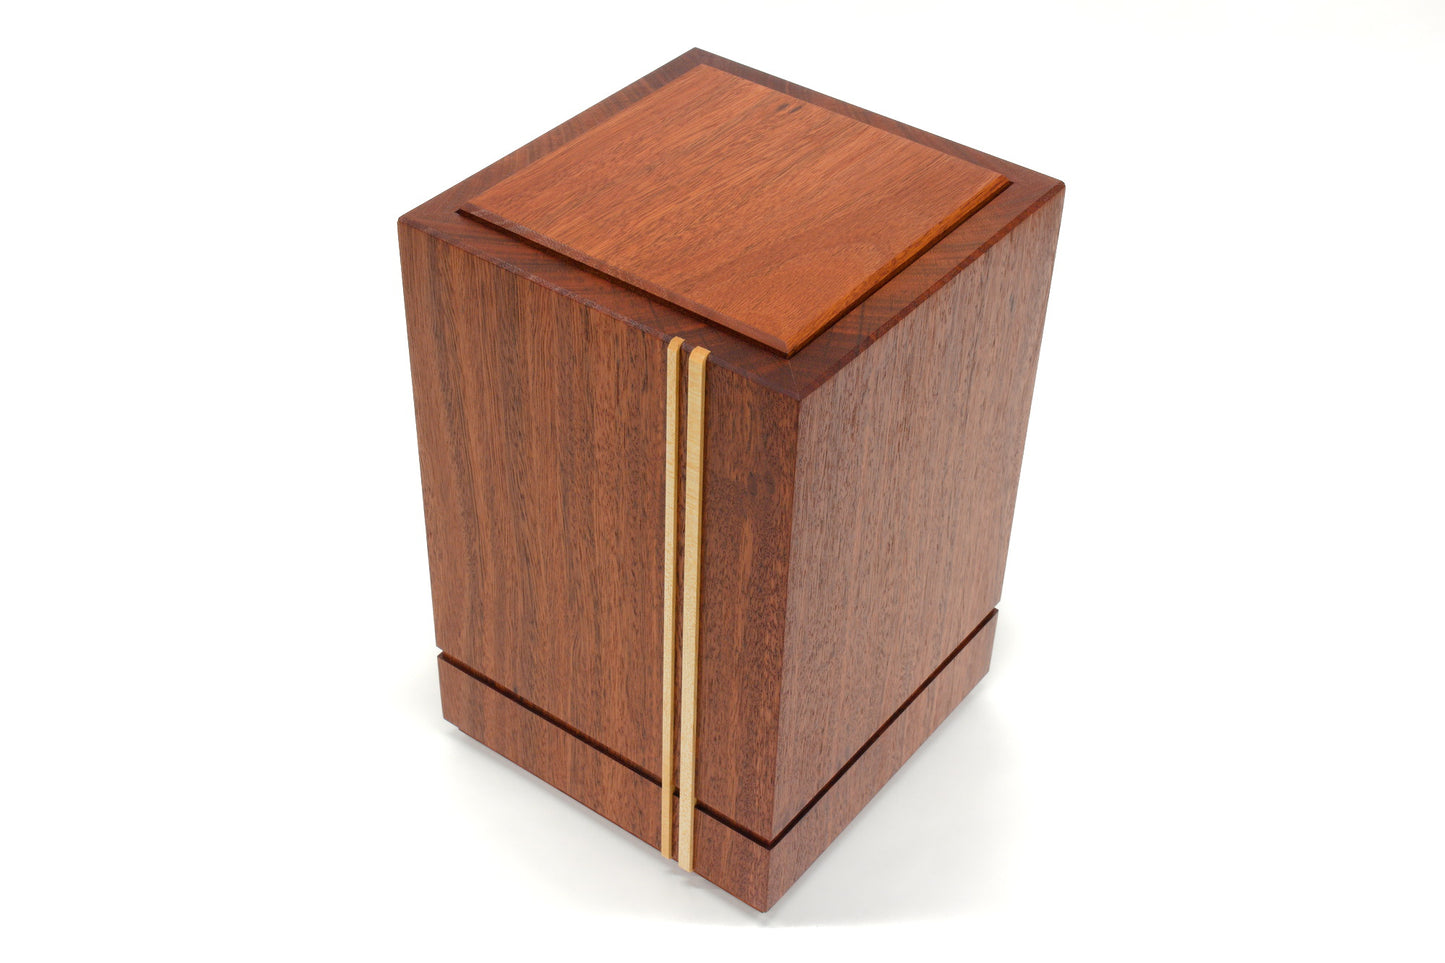 Wooden cremation urn handcrafted from Jarrah